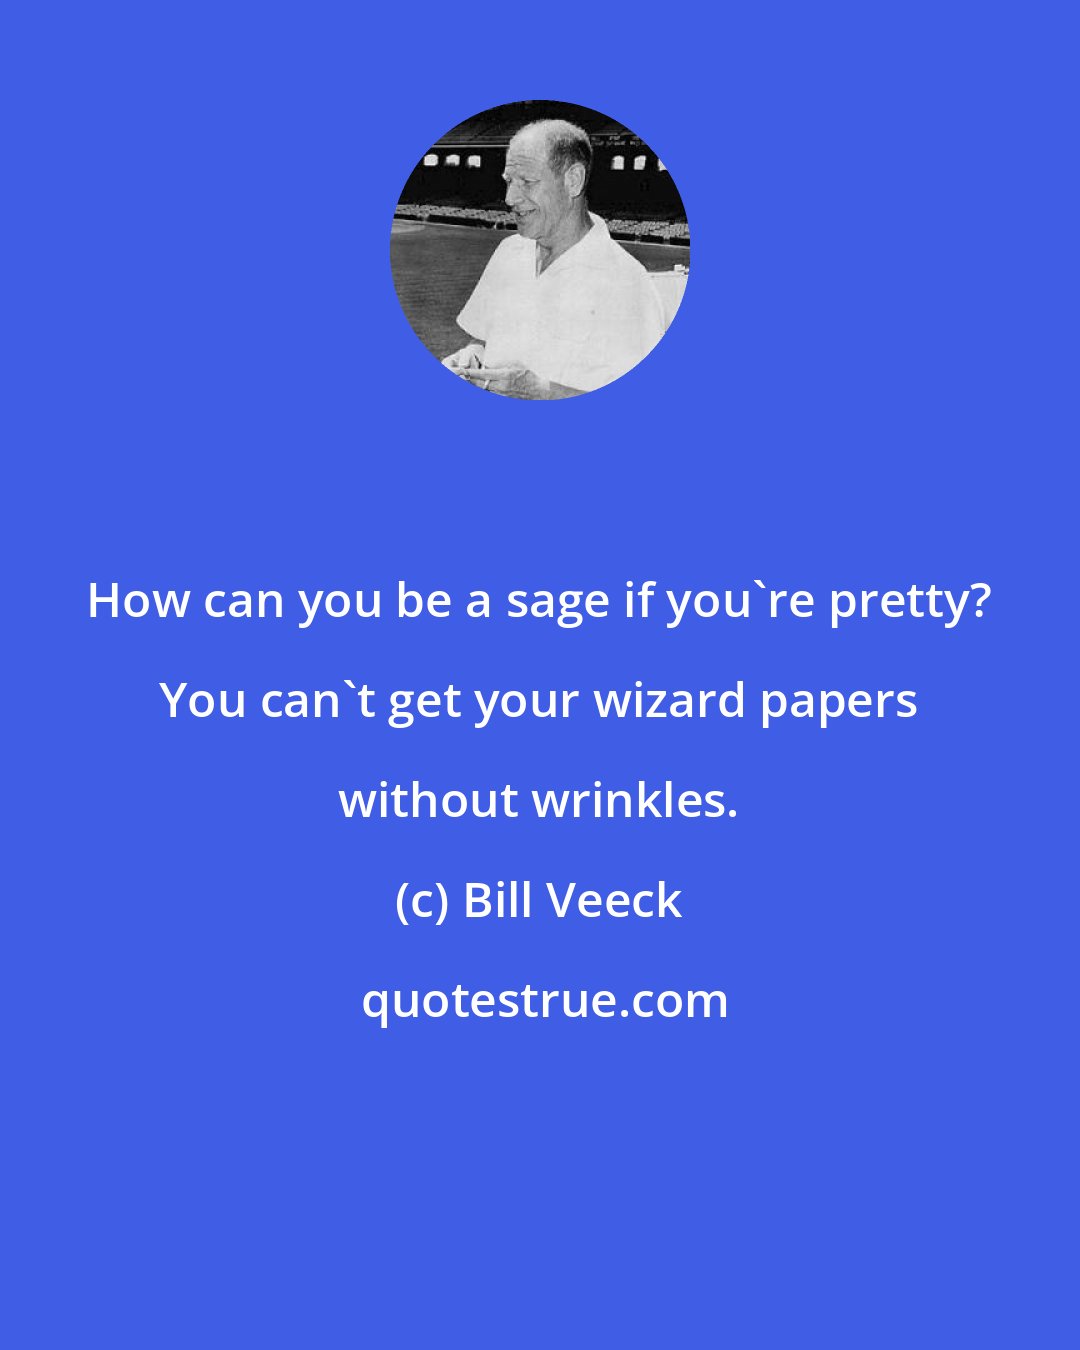 Bill Veeck: How can you be a sage if you're pretty? You can't get your wizard papers without wrinkles.